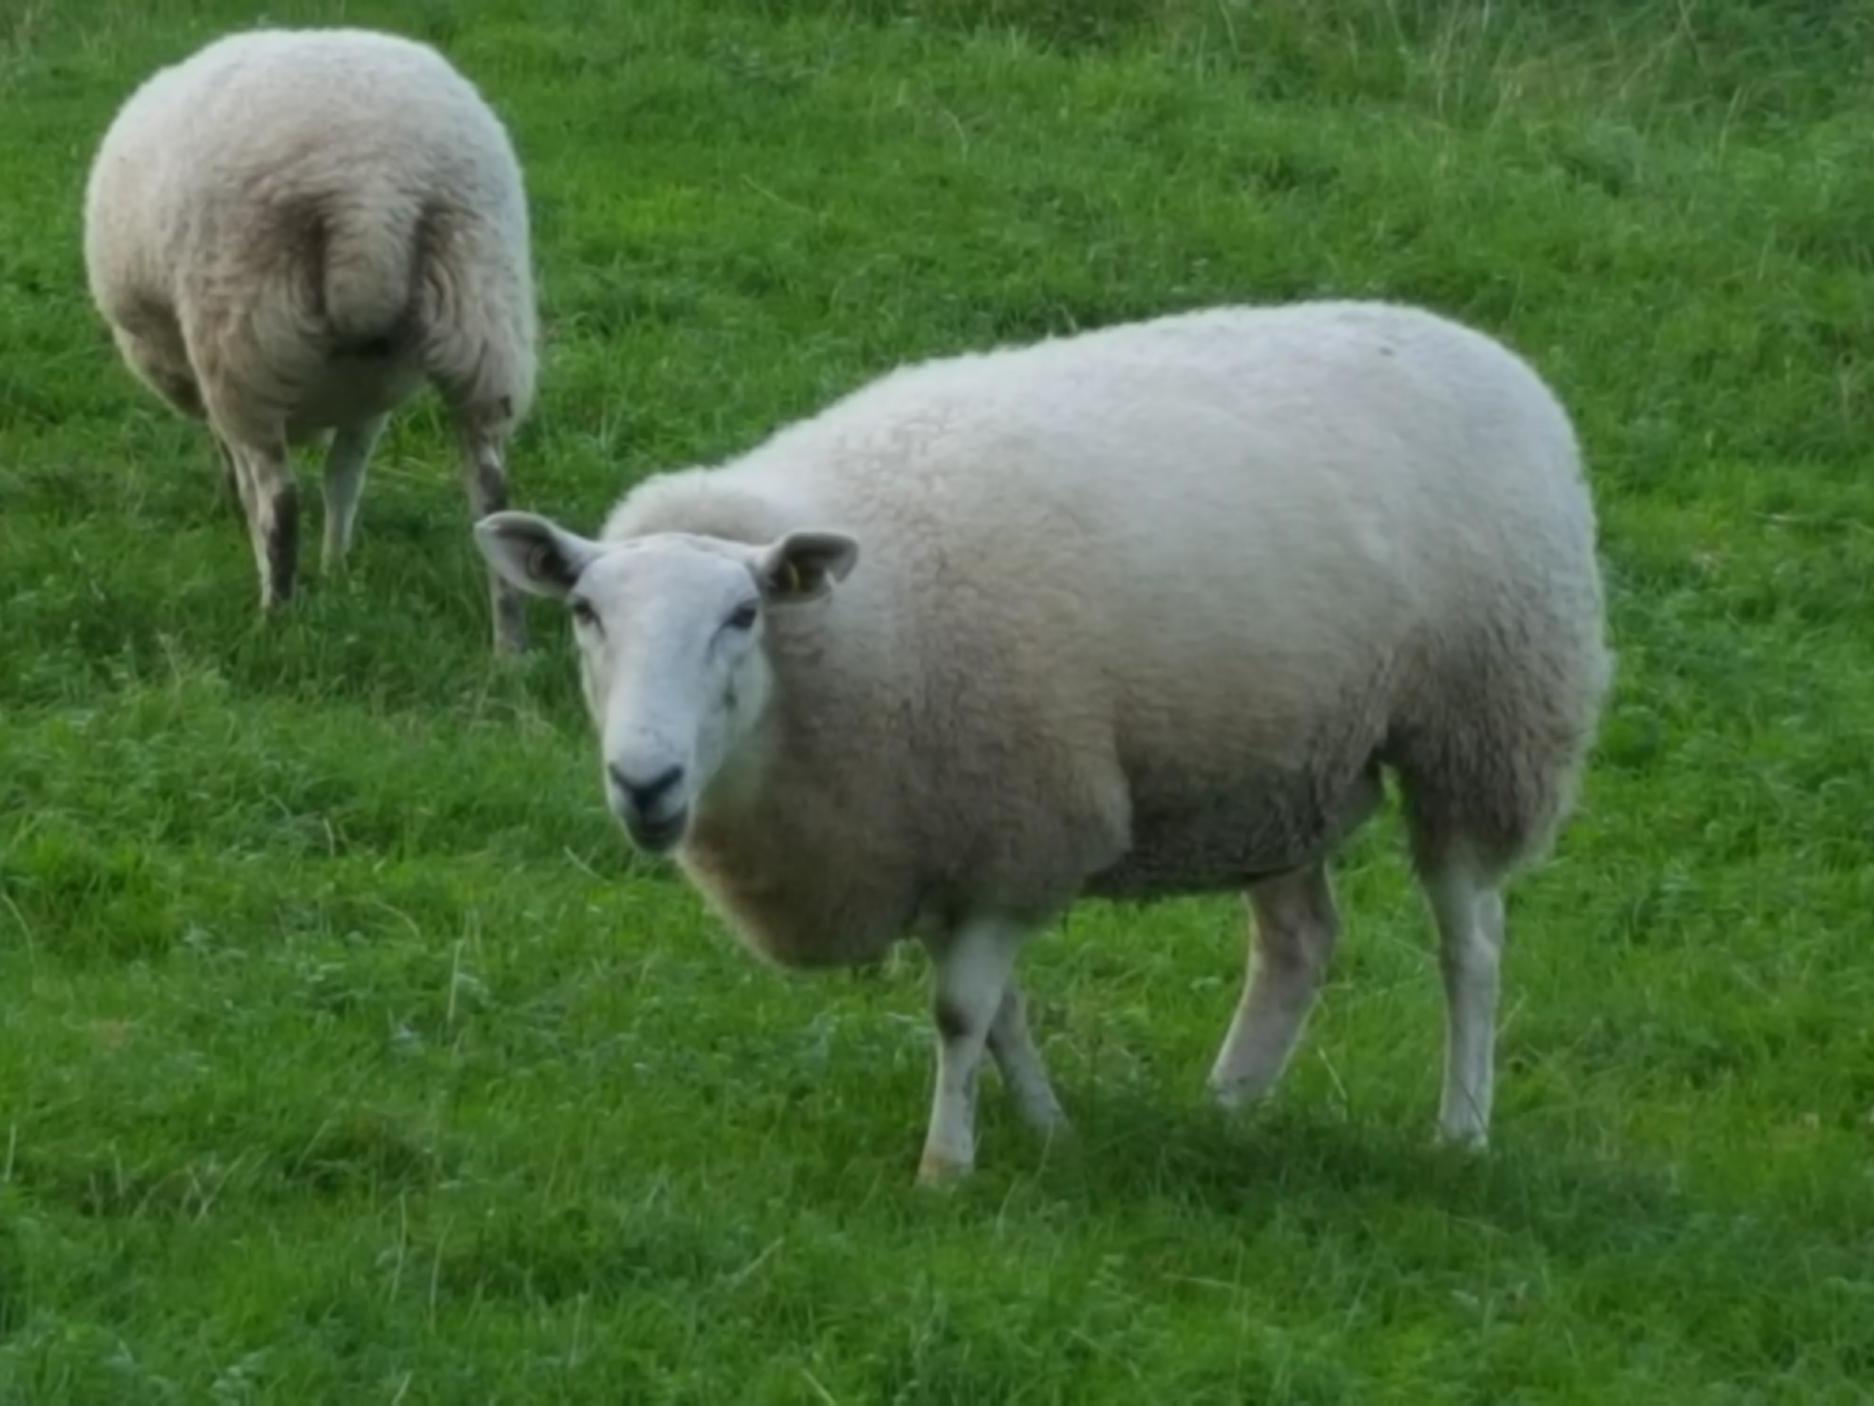 Sheep worth a total of ?3m were stolen from farms last year, and the number shot up during the height of the pandemic